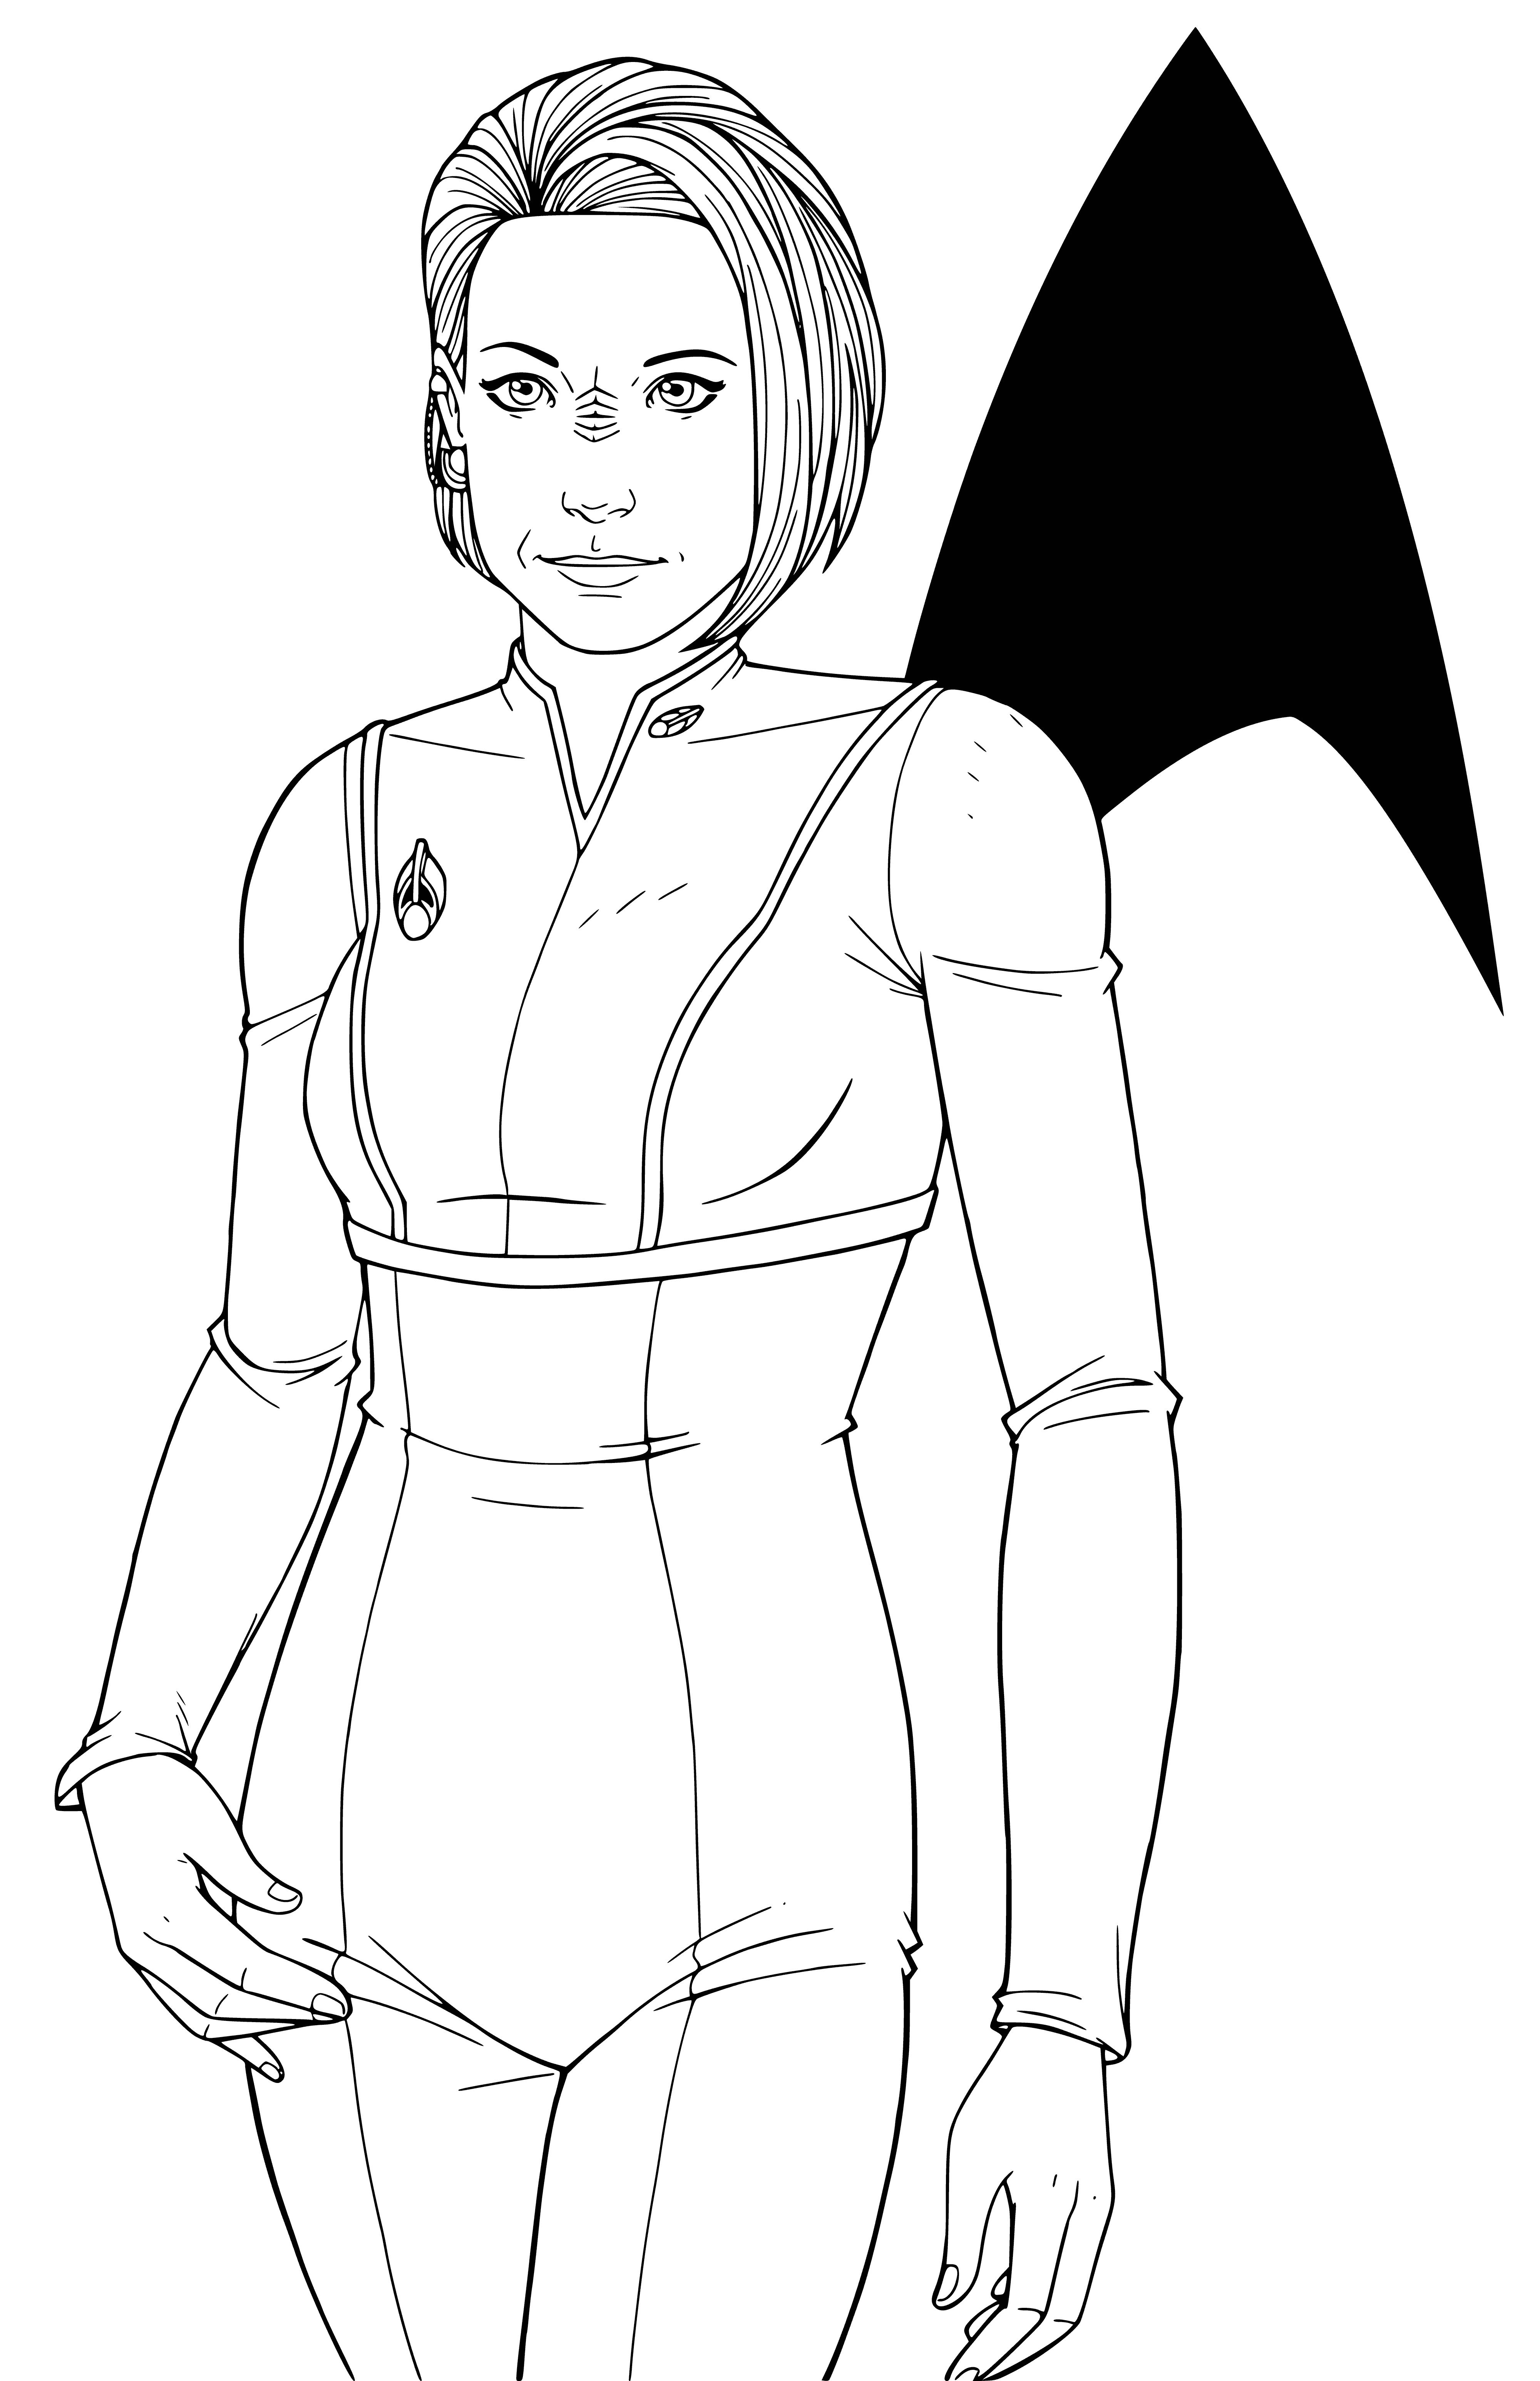 coloring page: Kira Neris is a powerful superhero who fights evil. She has super strength, speed, and agility, and is a fearless leader ready to fight for justice.